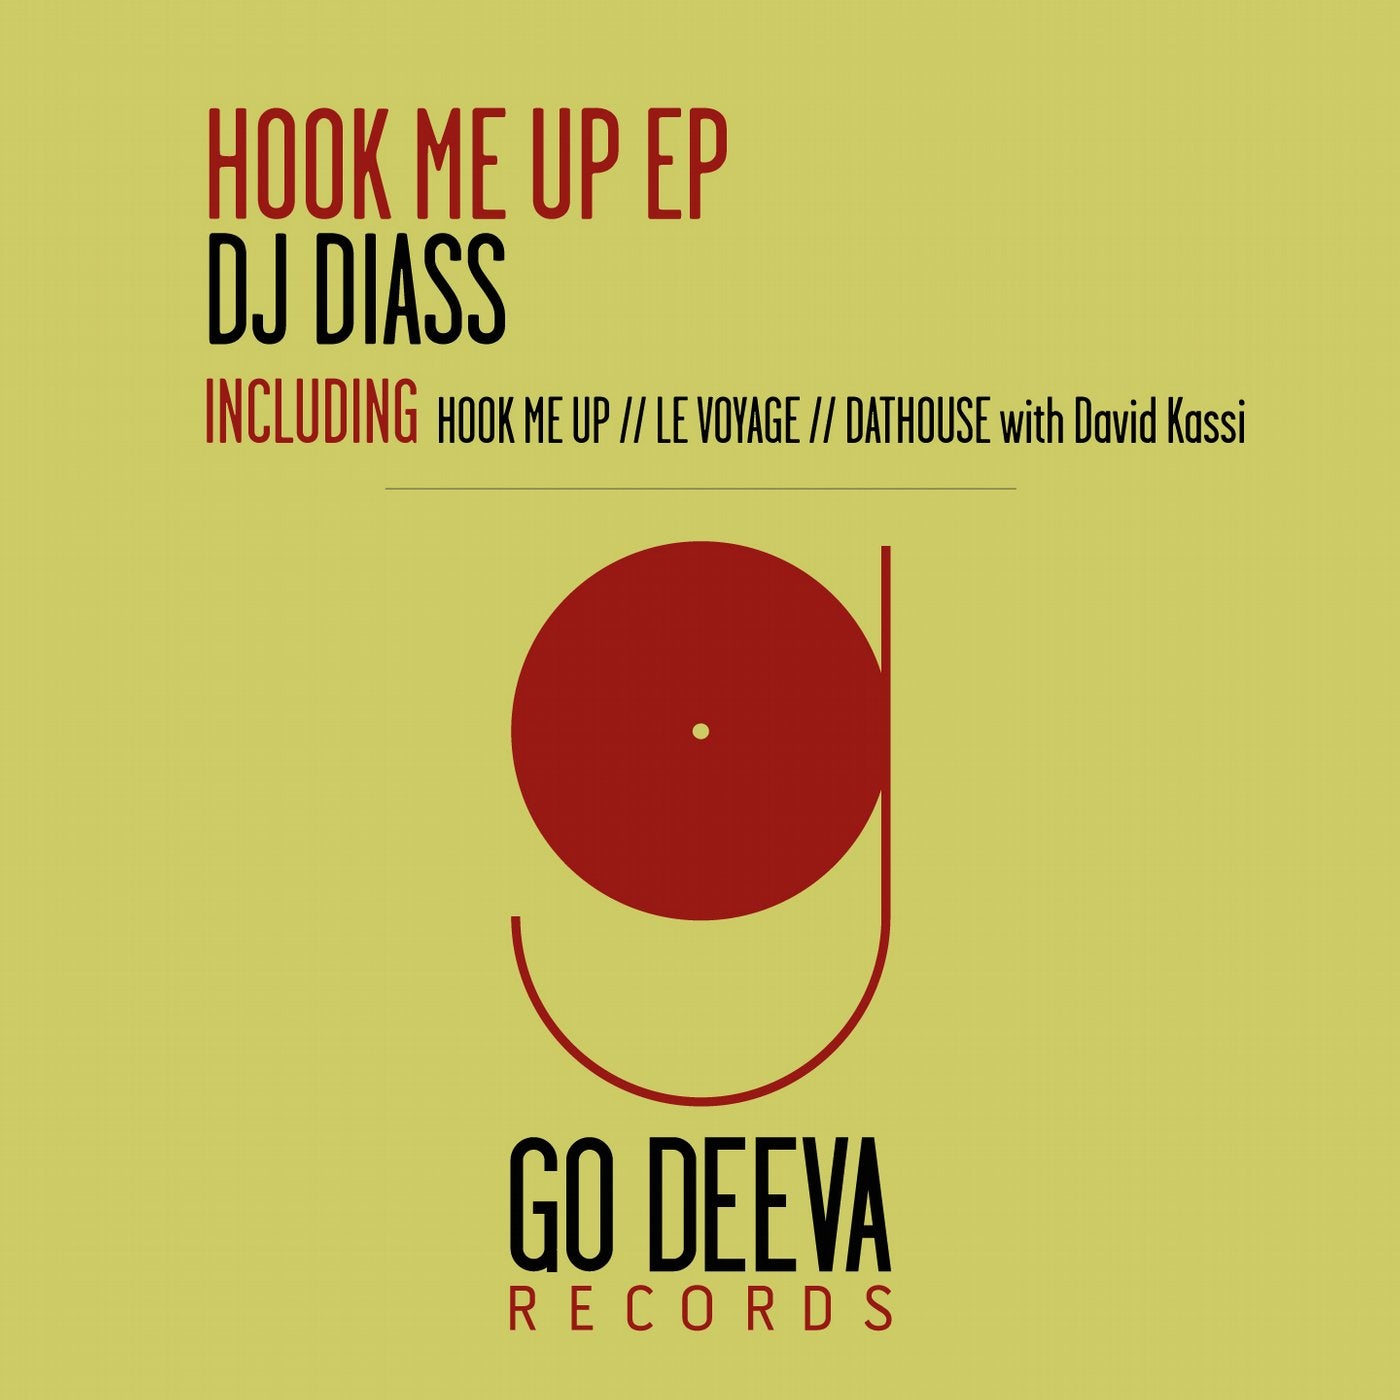 Hook Me Up Ep